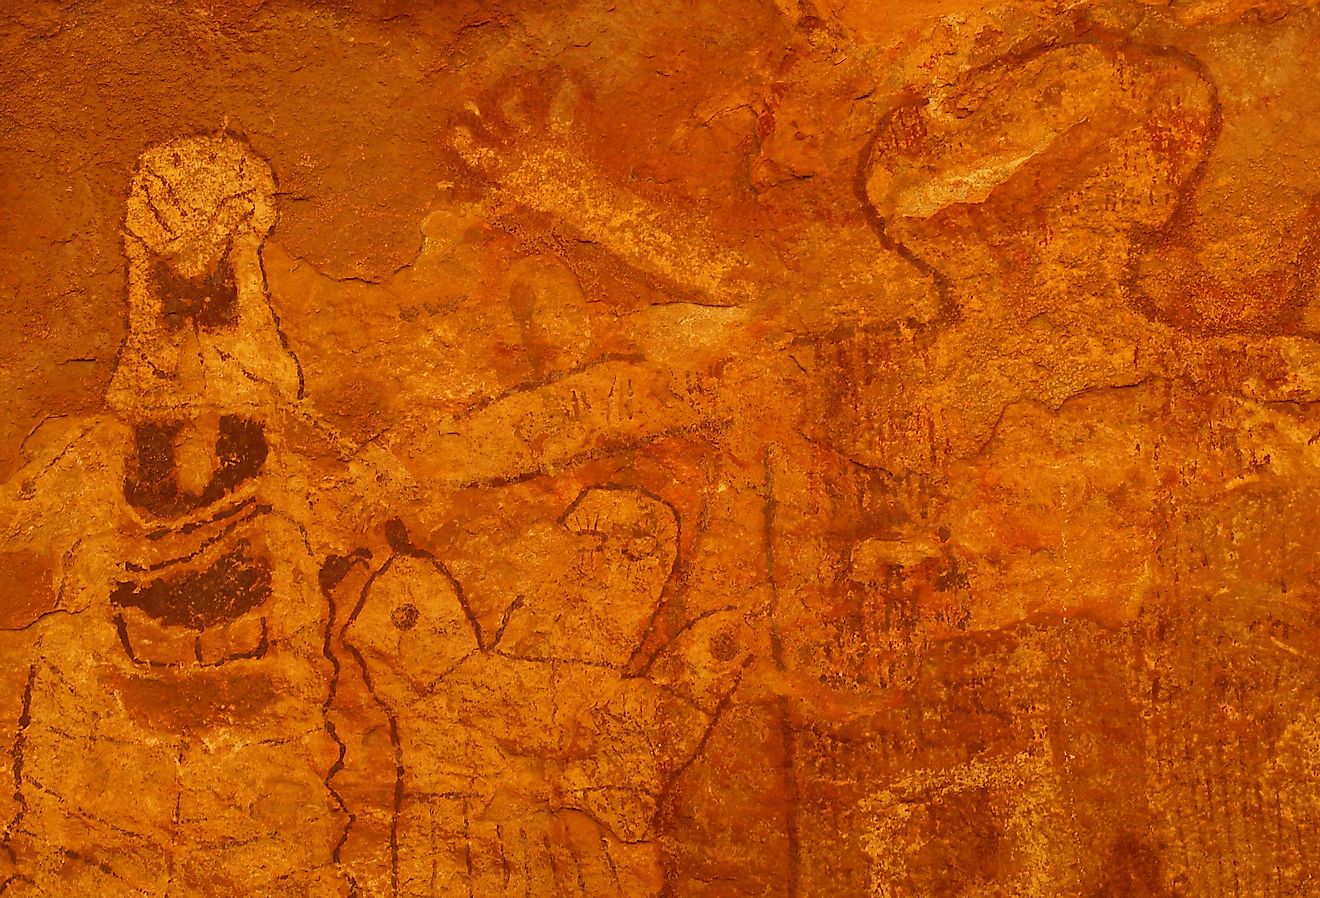 Close up of pictographs painted on cave wall by prehistoric Native American(s), possibly thousands of years old. Remote cave inside Grand Canyon National Park, Arizona.